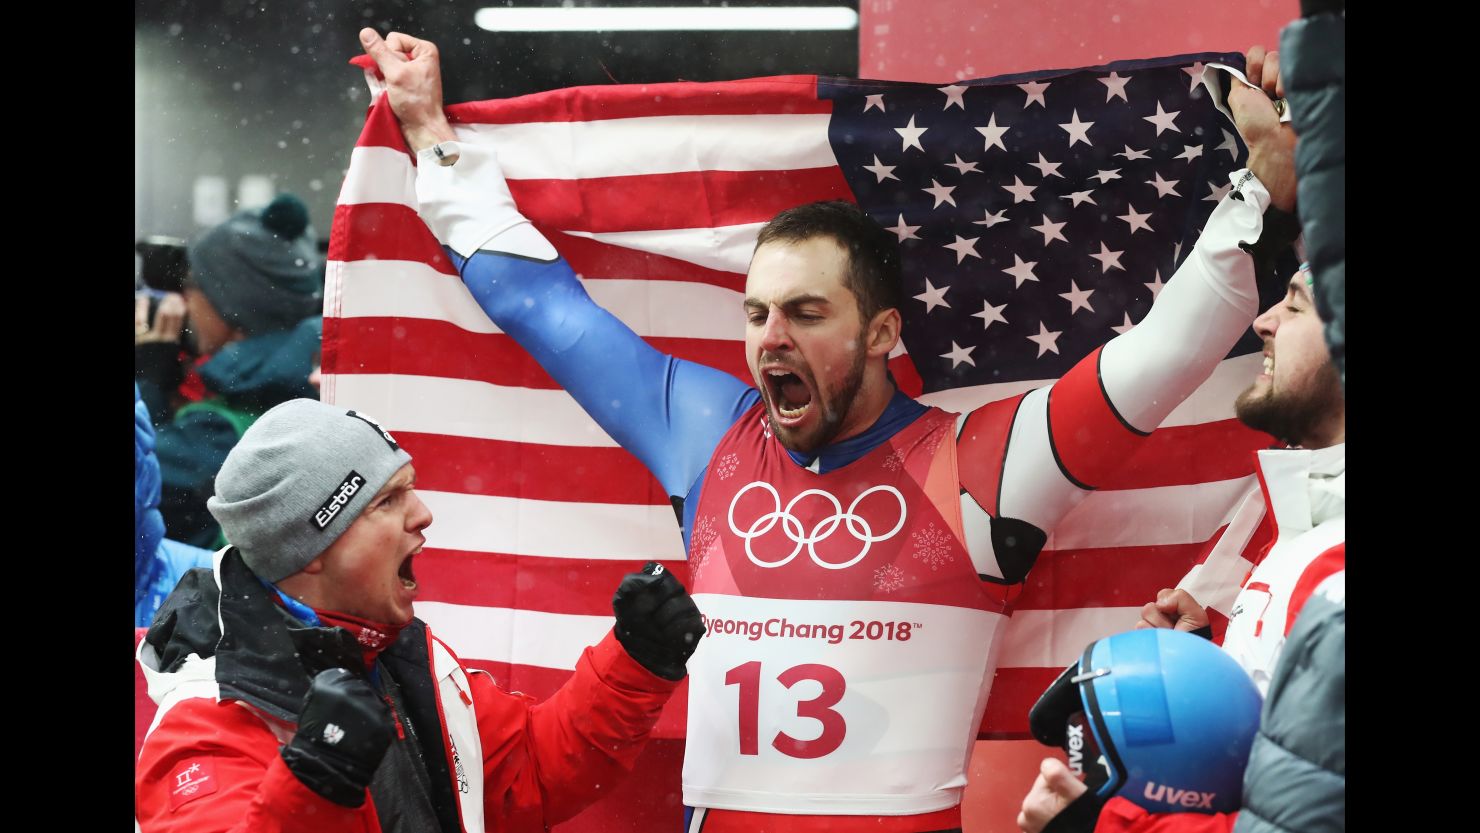 Chris Mazdzer of the United States celebrates after winning the silver medal following run 4 during the luge men's singles. 